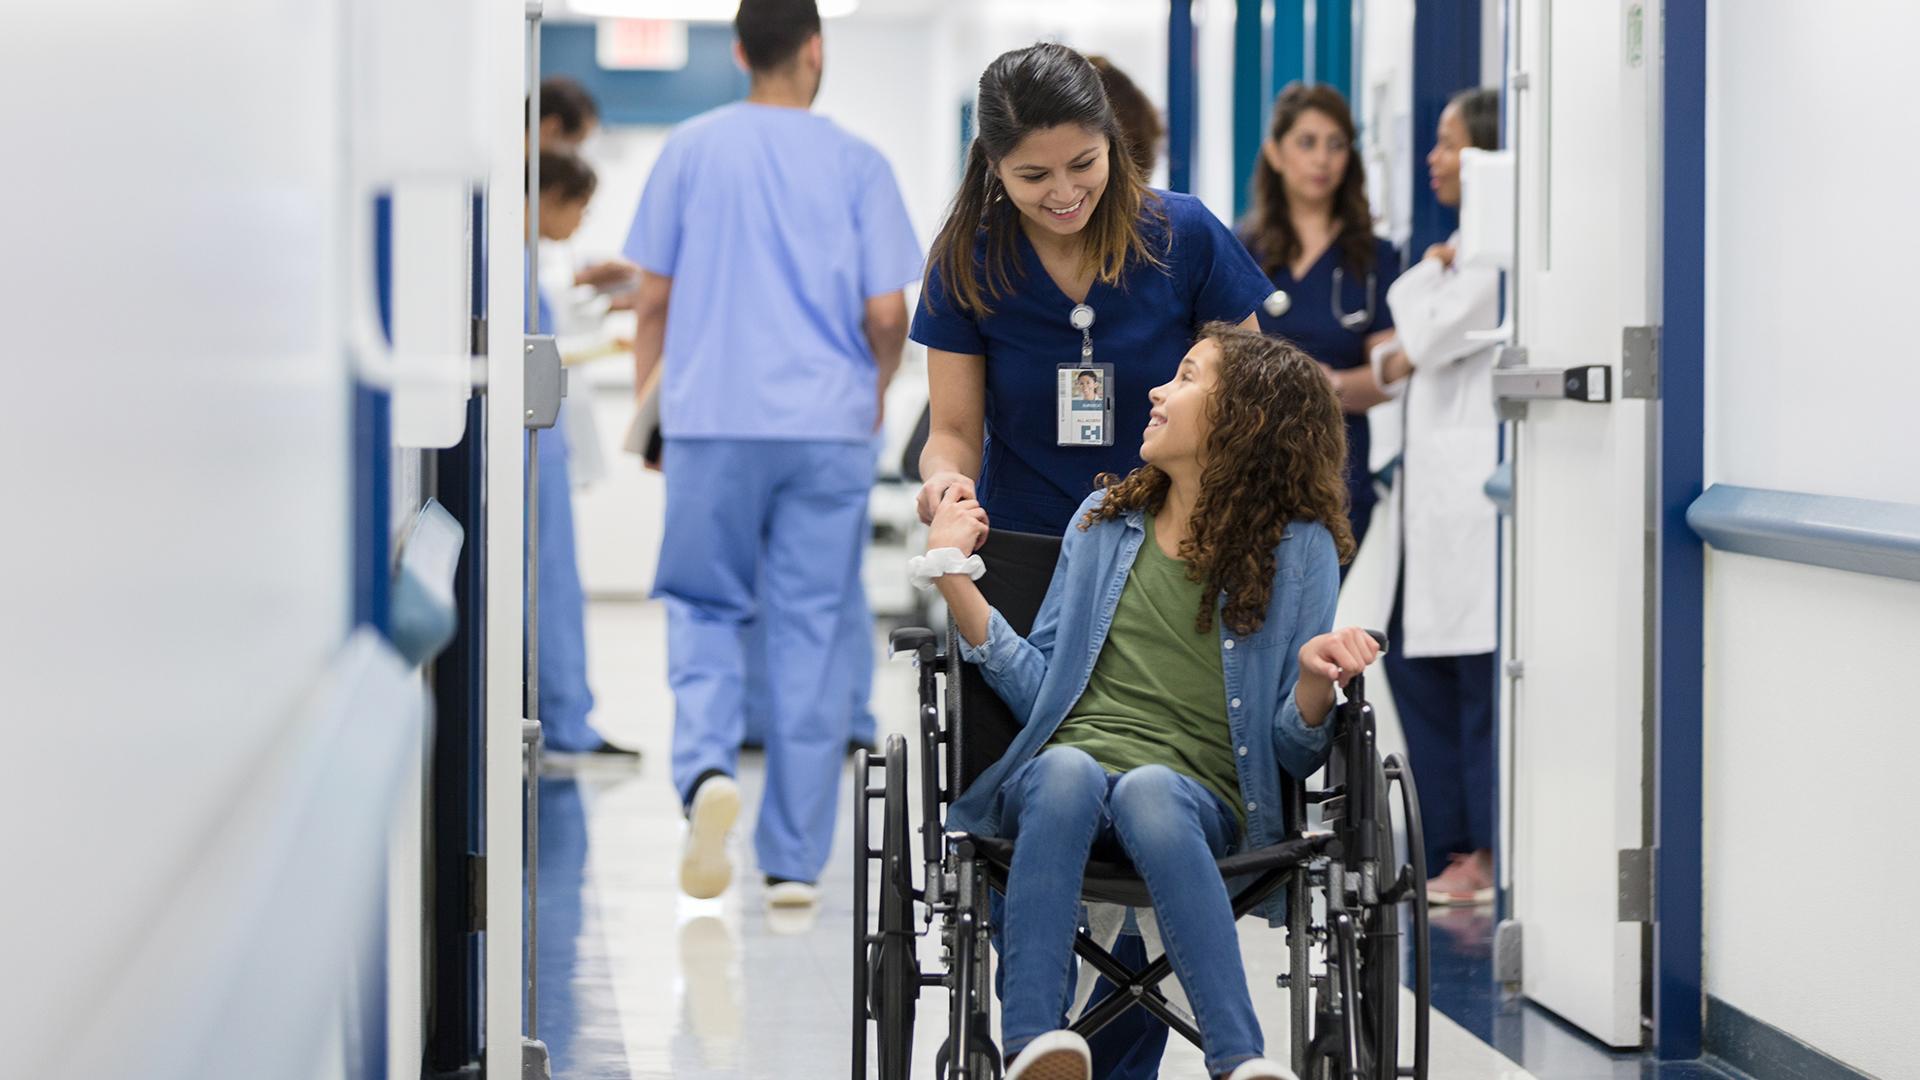 A young girl talks with a nurse, who is pushing the girl in a wheelchair in a busy hospital hallway.